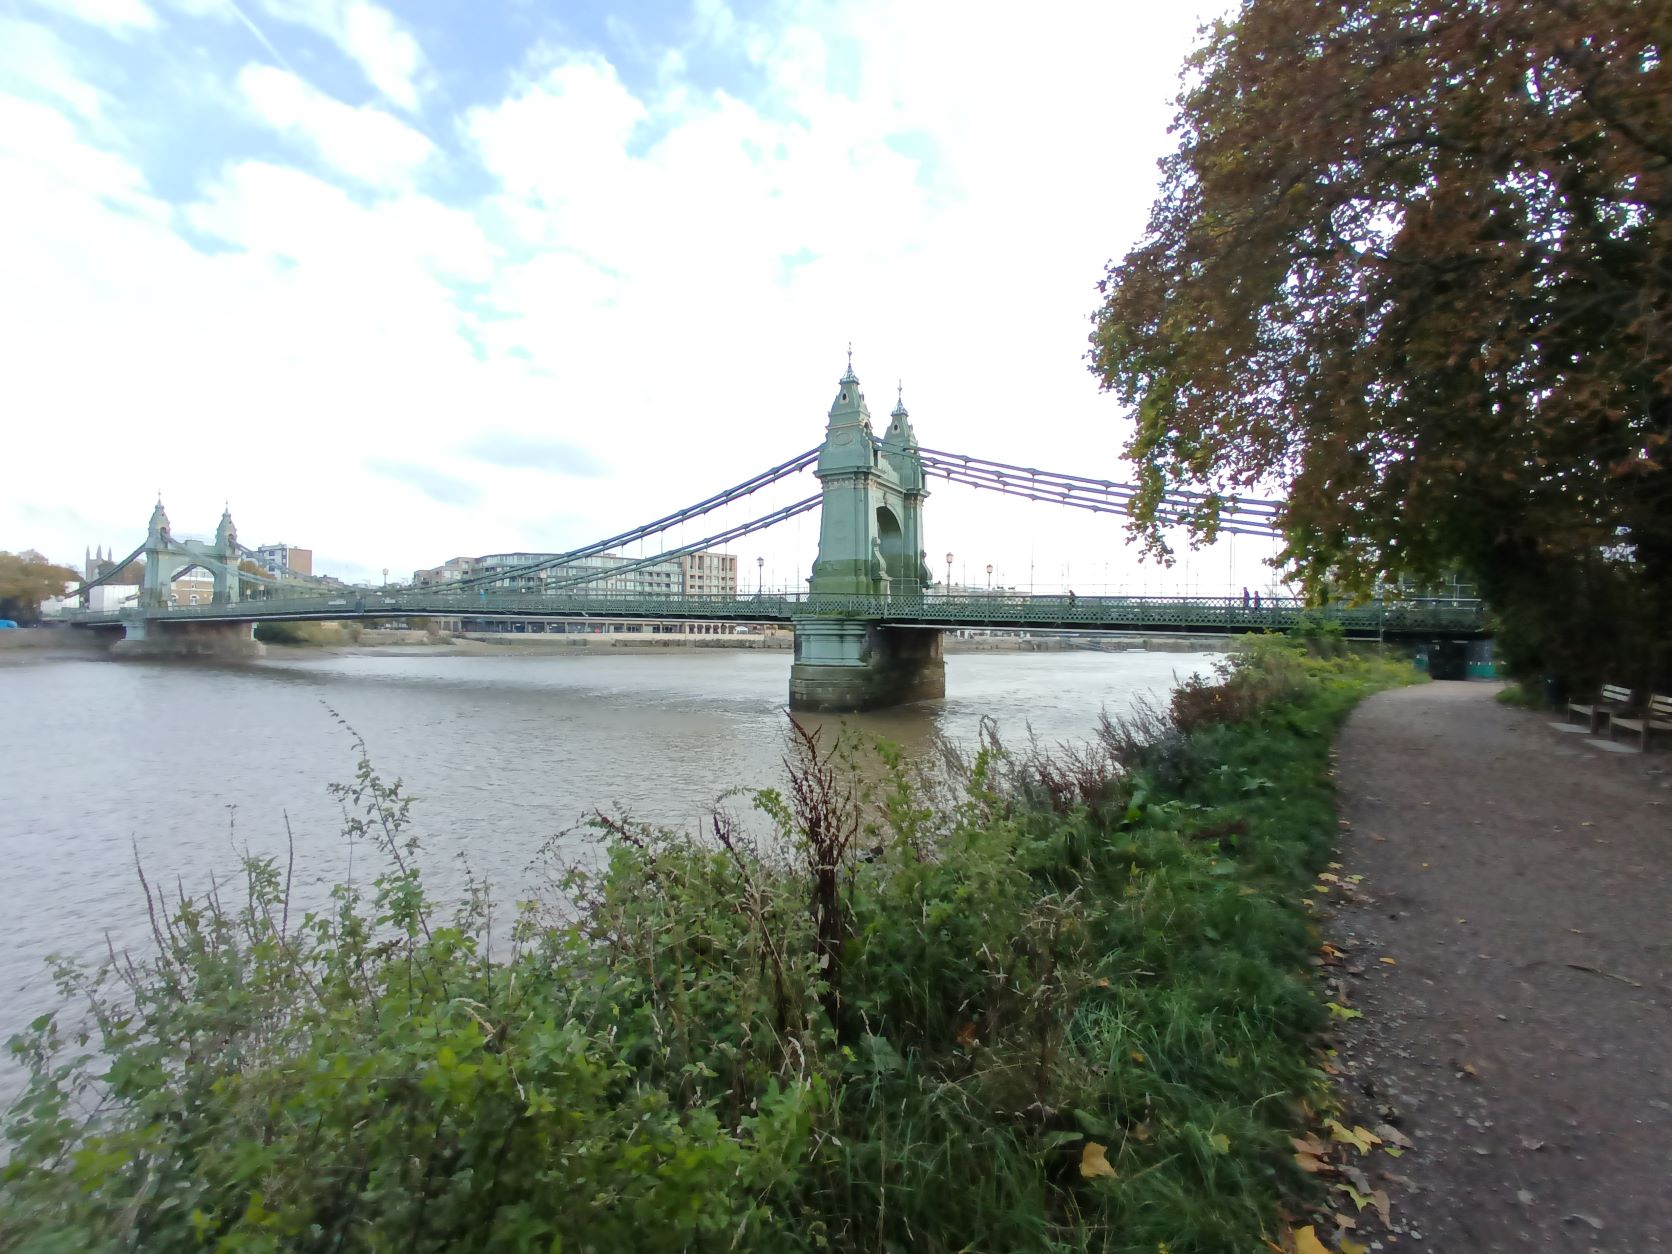 Thames Path traffic-free cycle route